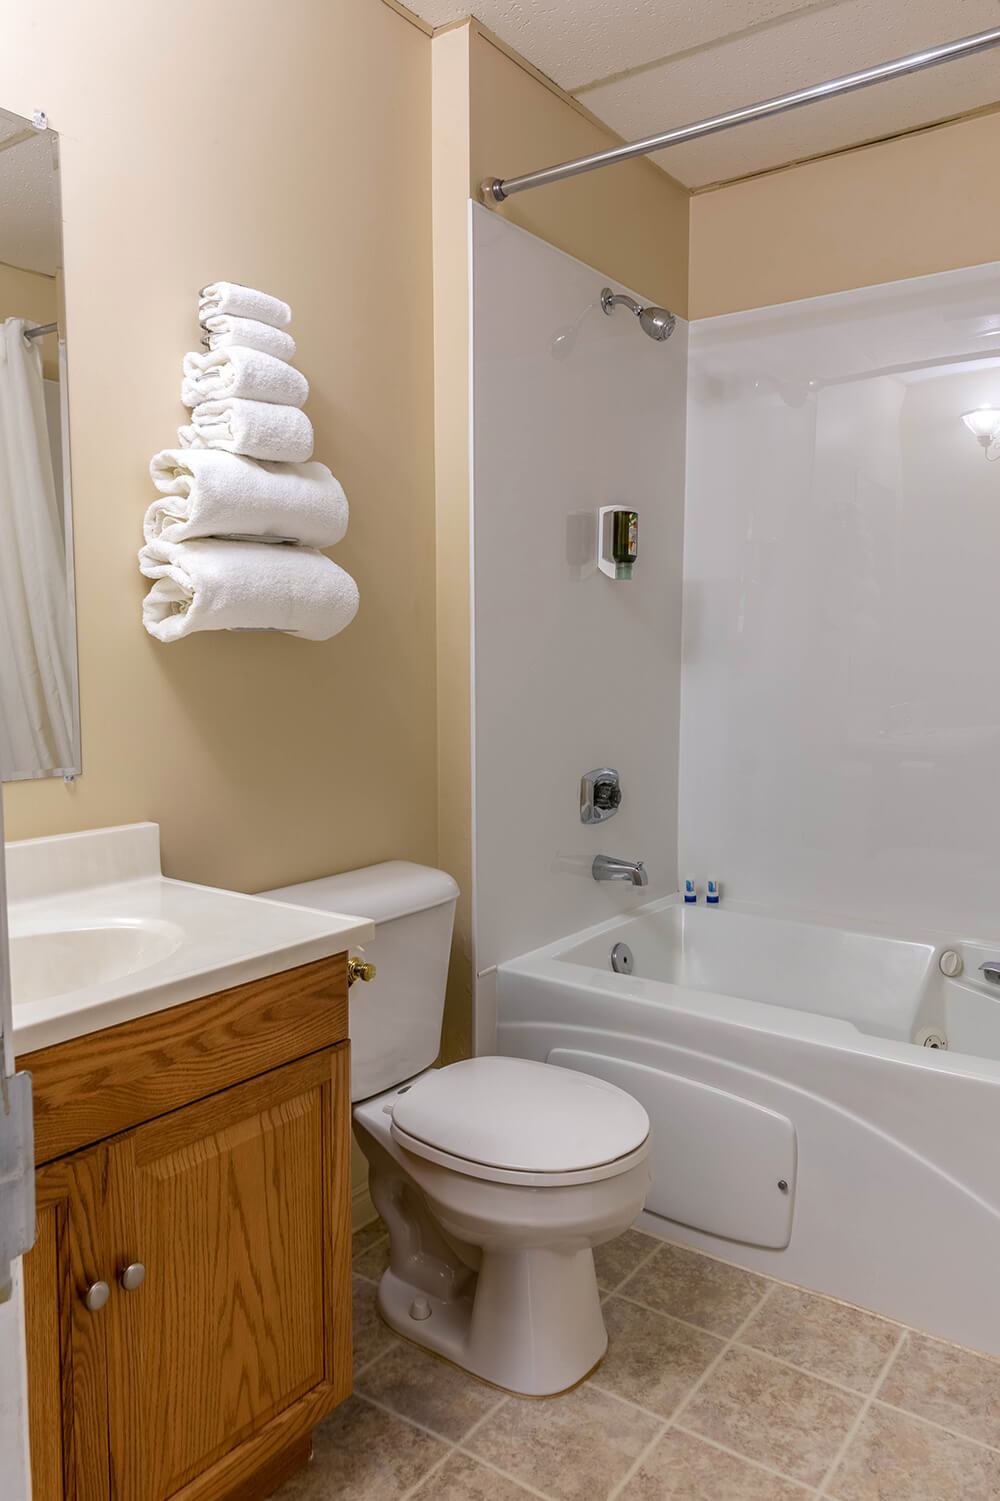 Bathroom with folded towels on the wall